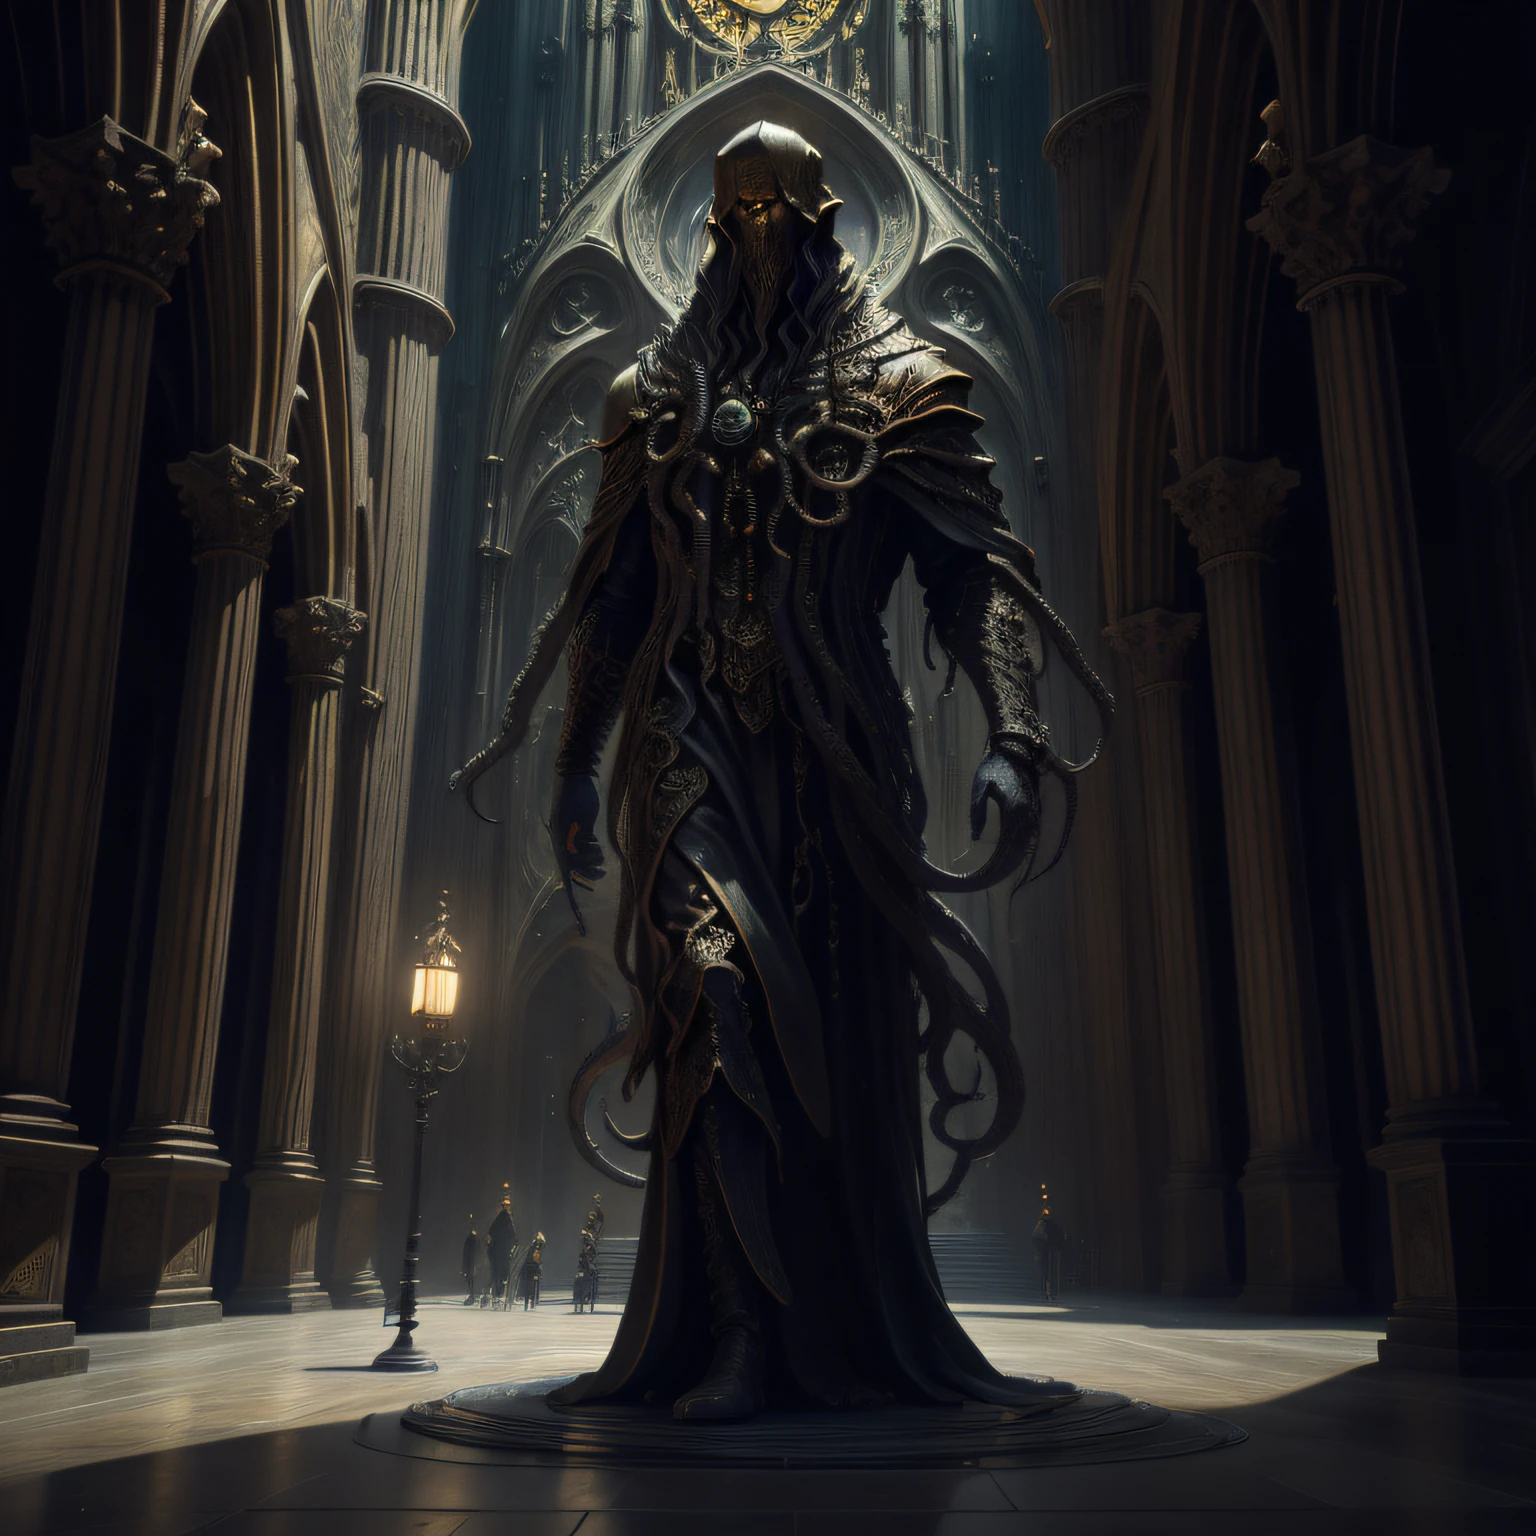 "[a statue of cthulhu] + eldrich horror + standing on a cathedral-like building hall + gothic architectural style + intricate black and gold accents, 8K masterpiece, photorealistic."